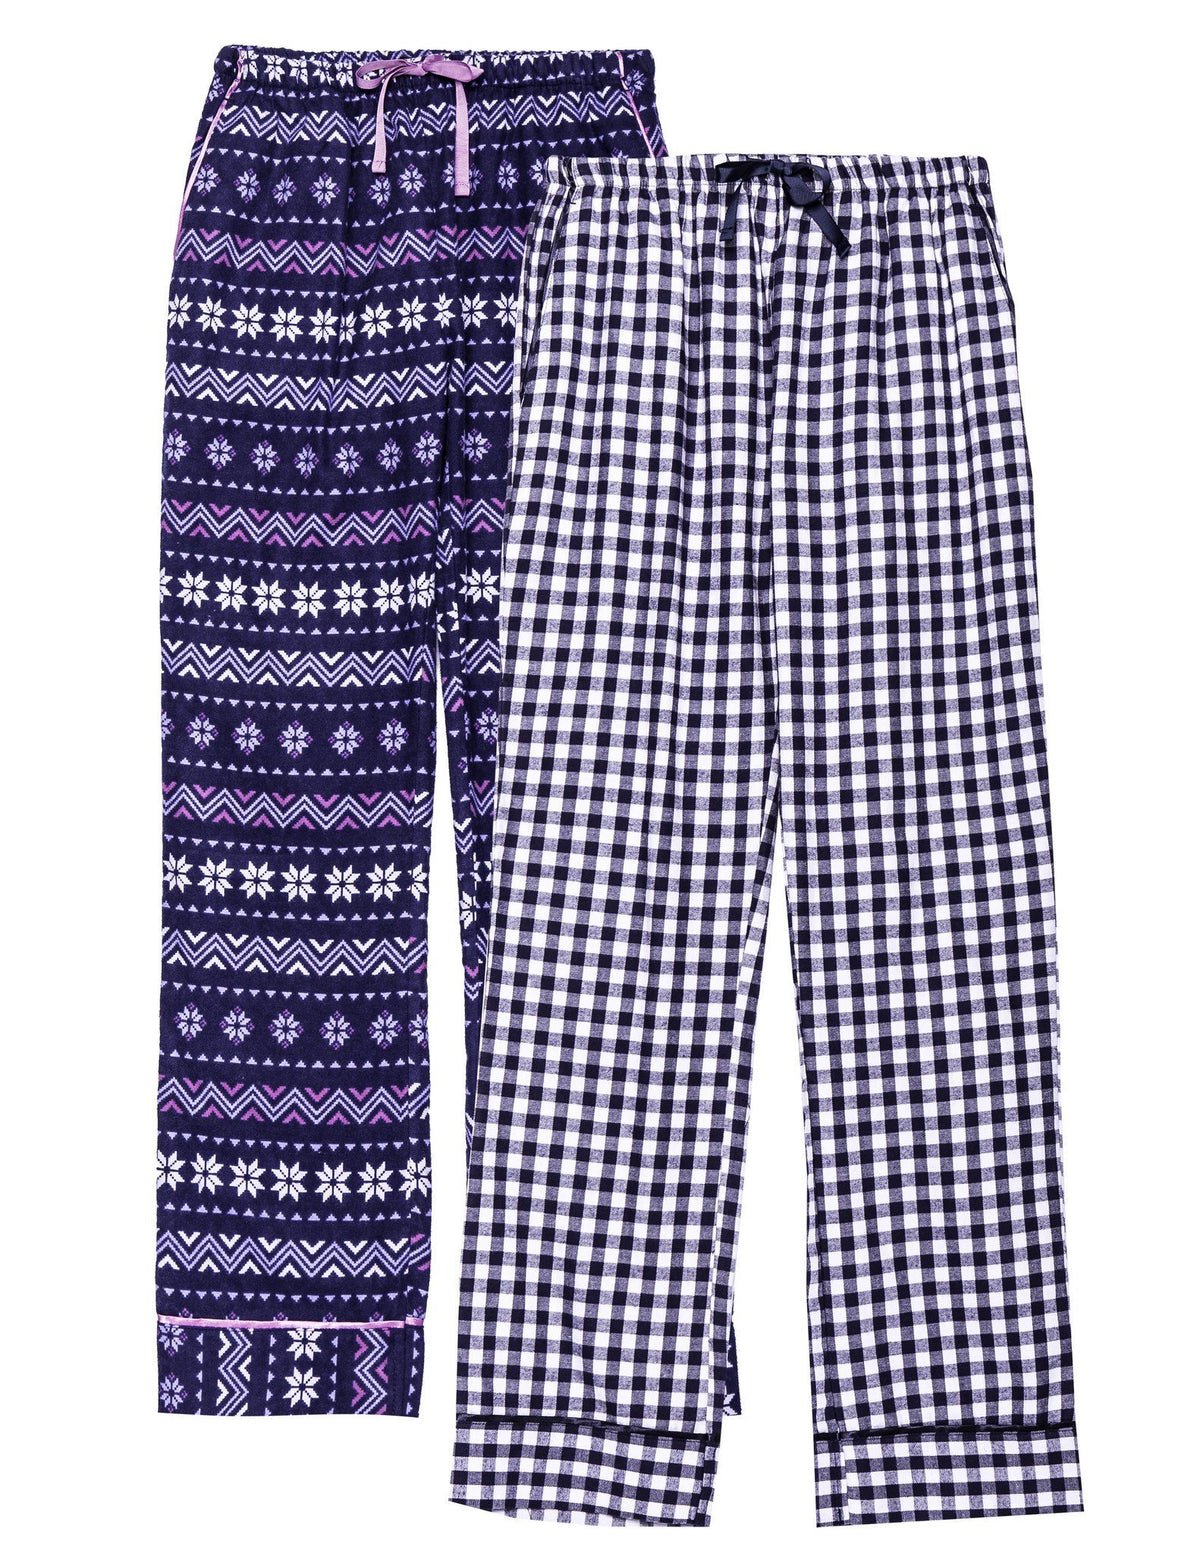 Women's 2 Pack Cotton Flannel Lounge Pants with Free Socks - 2-Pack with FREE Sock [Nordic Snow/Gingham Blue]